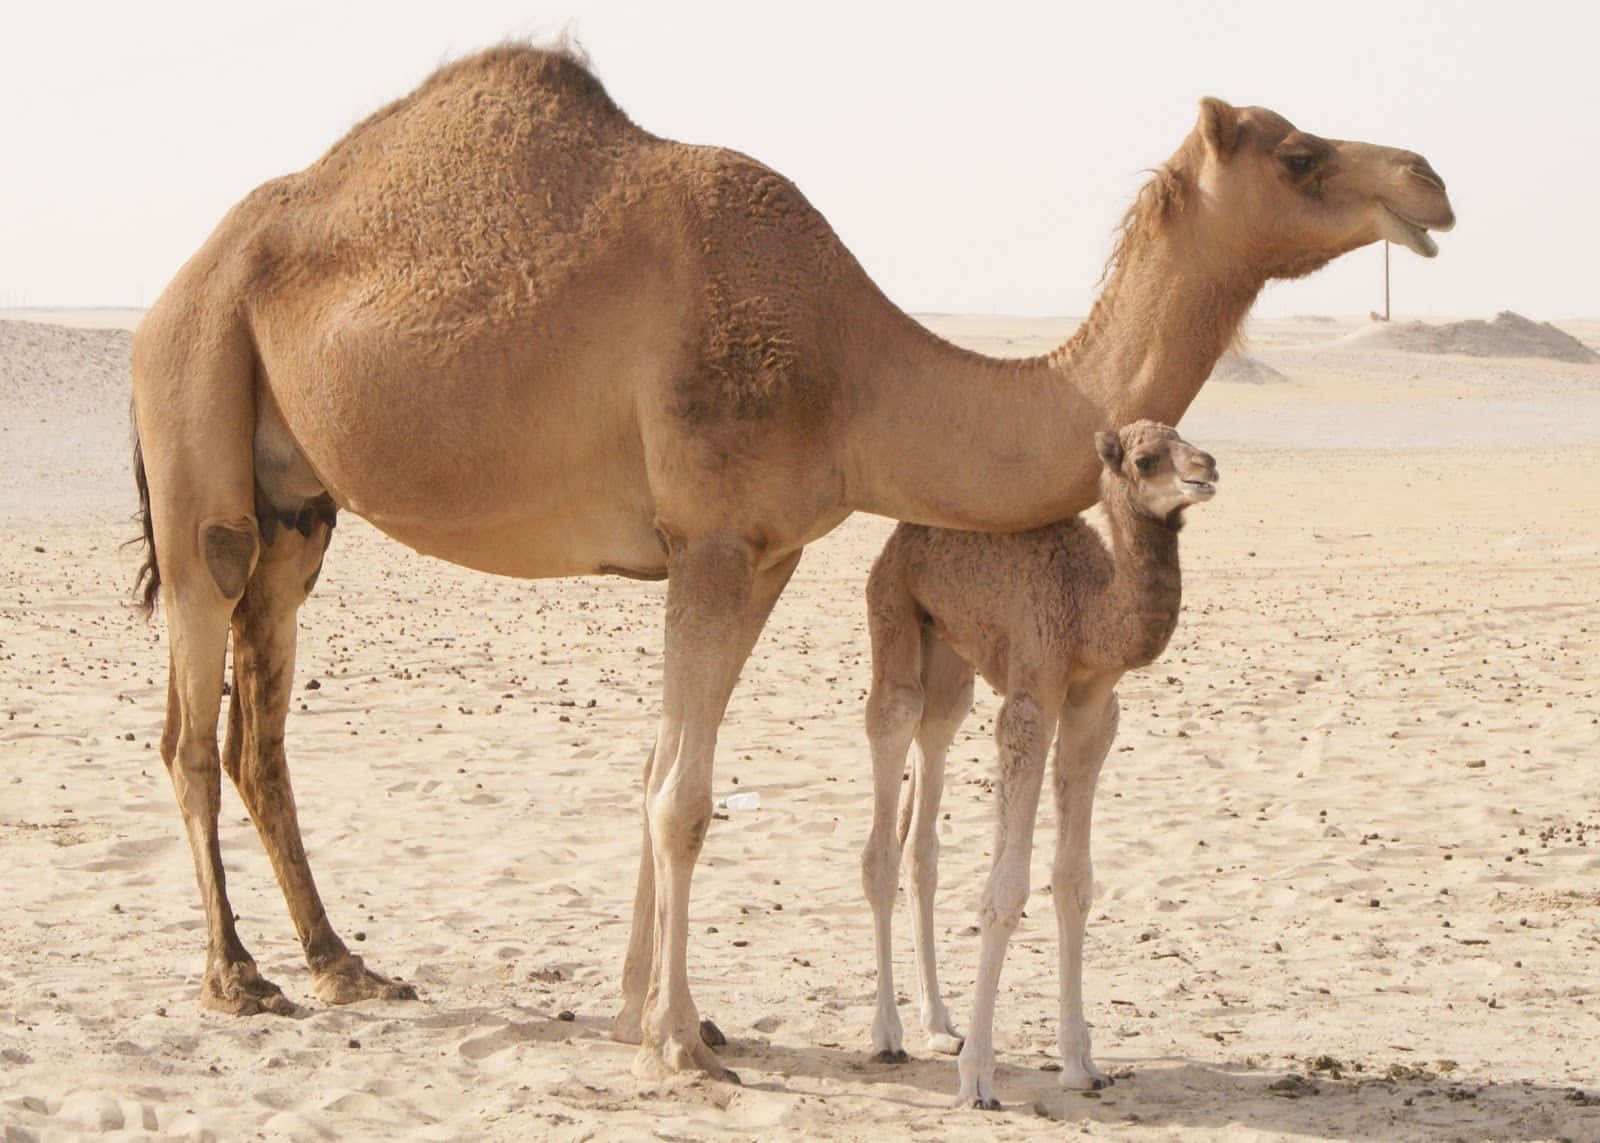 A close-up of a large two hump camel in sand dunes